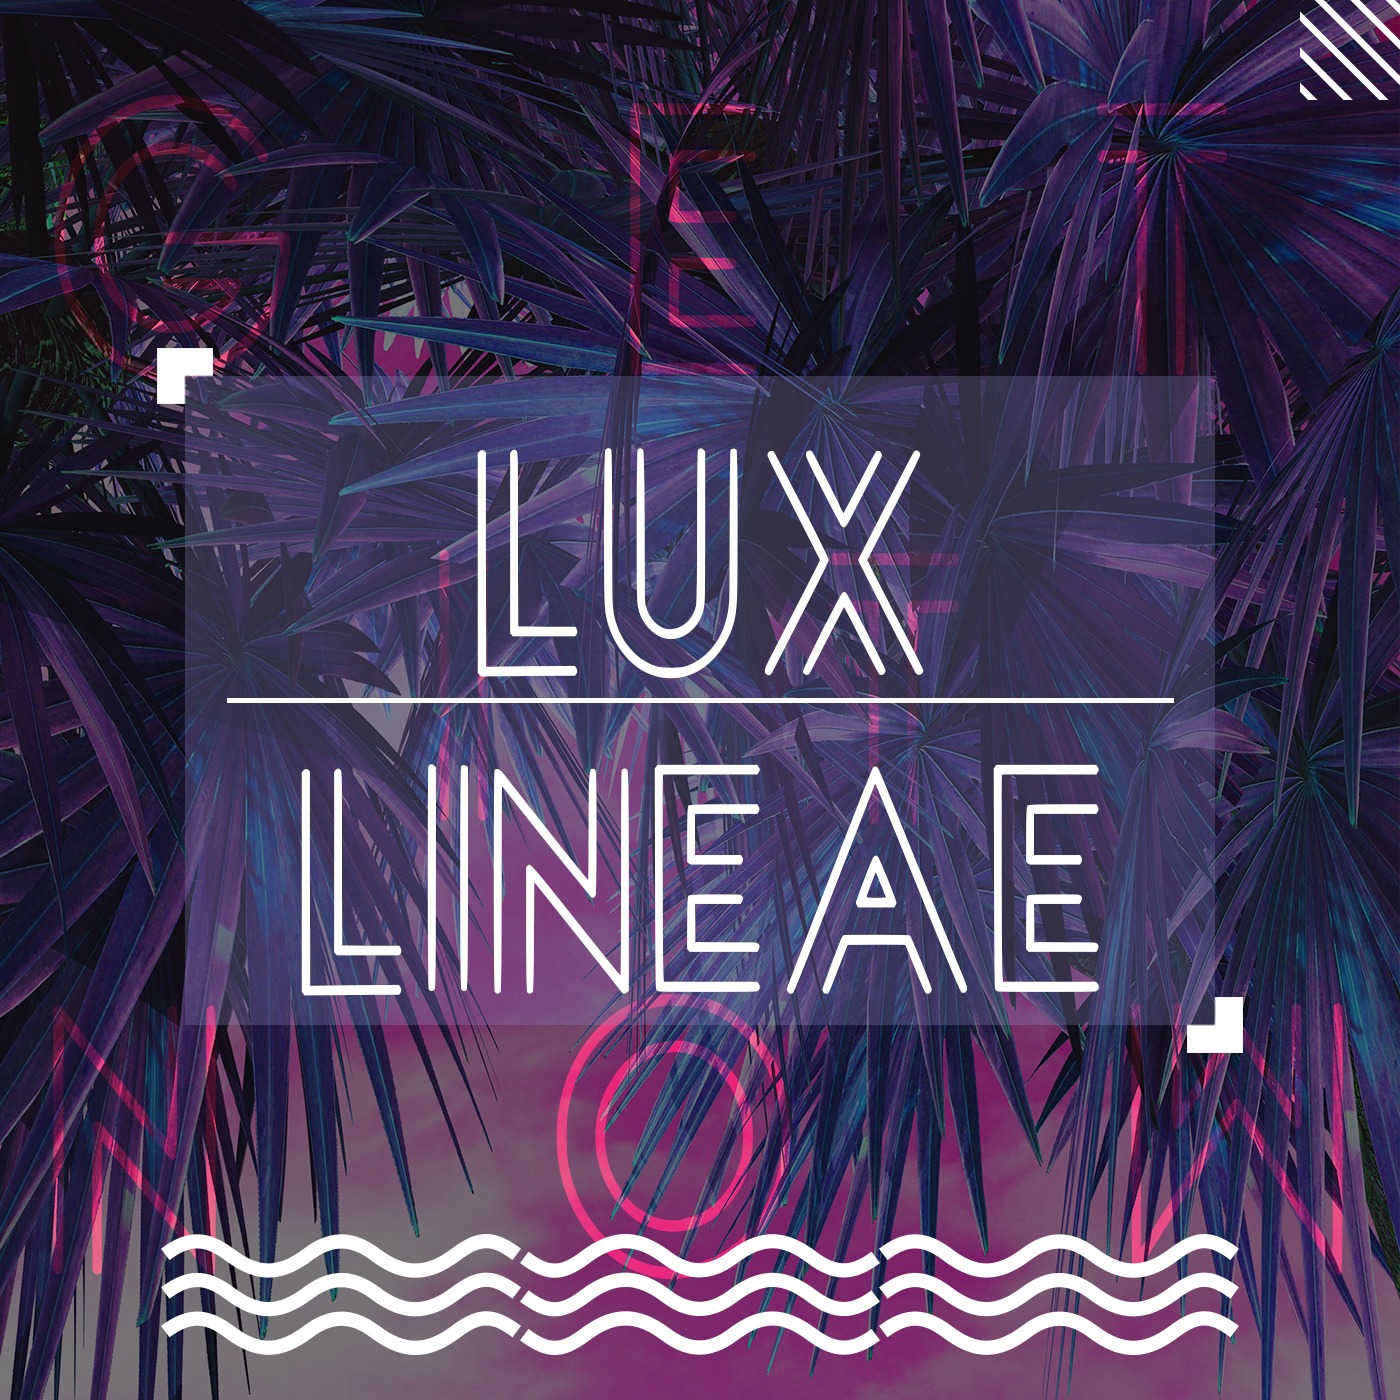 Font Lux Lineae